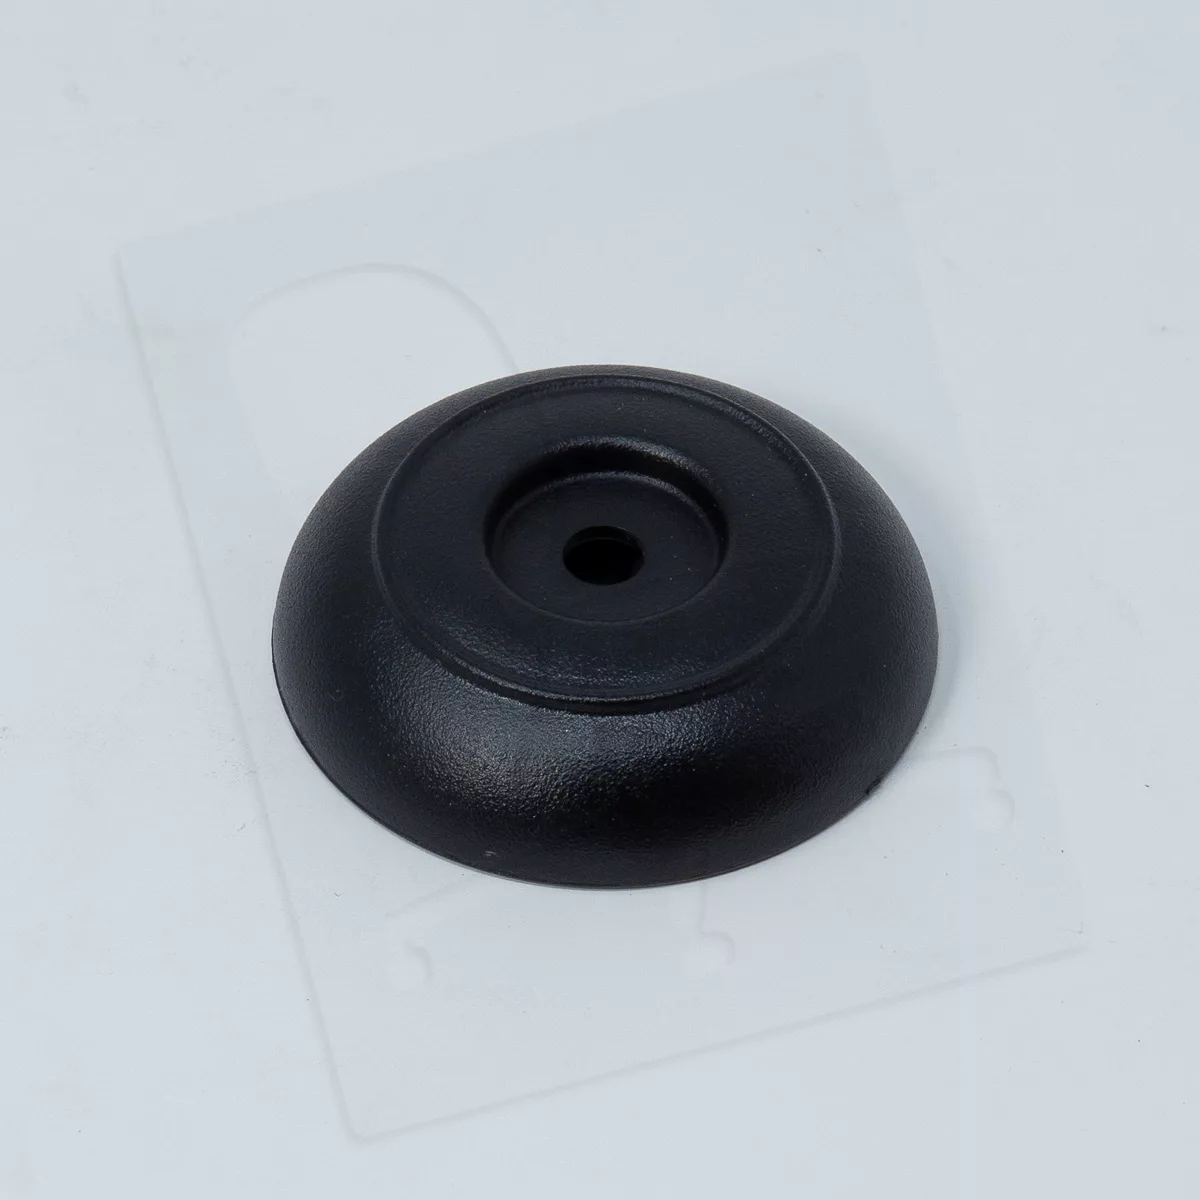 Crandall Office Furniture Aftermarket Steelcase 462 Leap V2 Tension Knob Cover Cap 0001